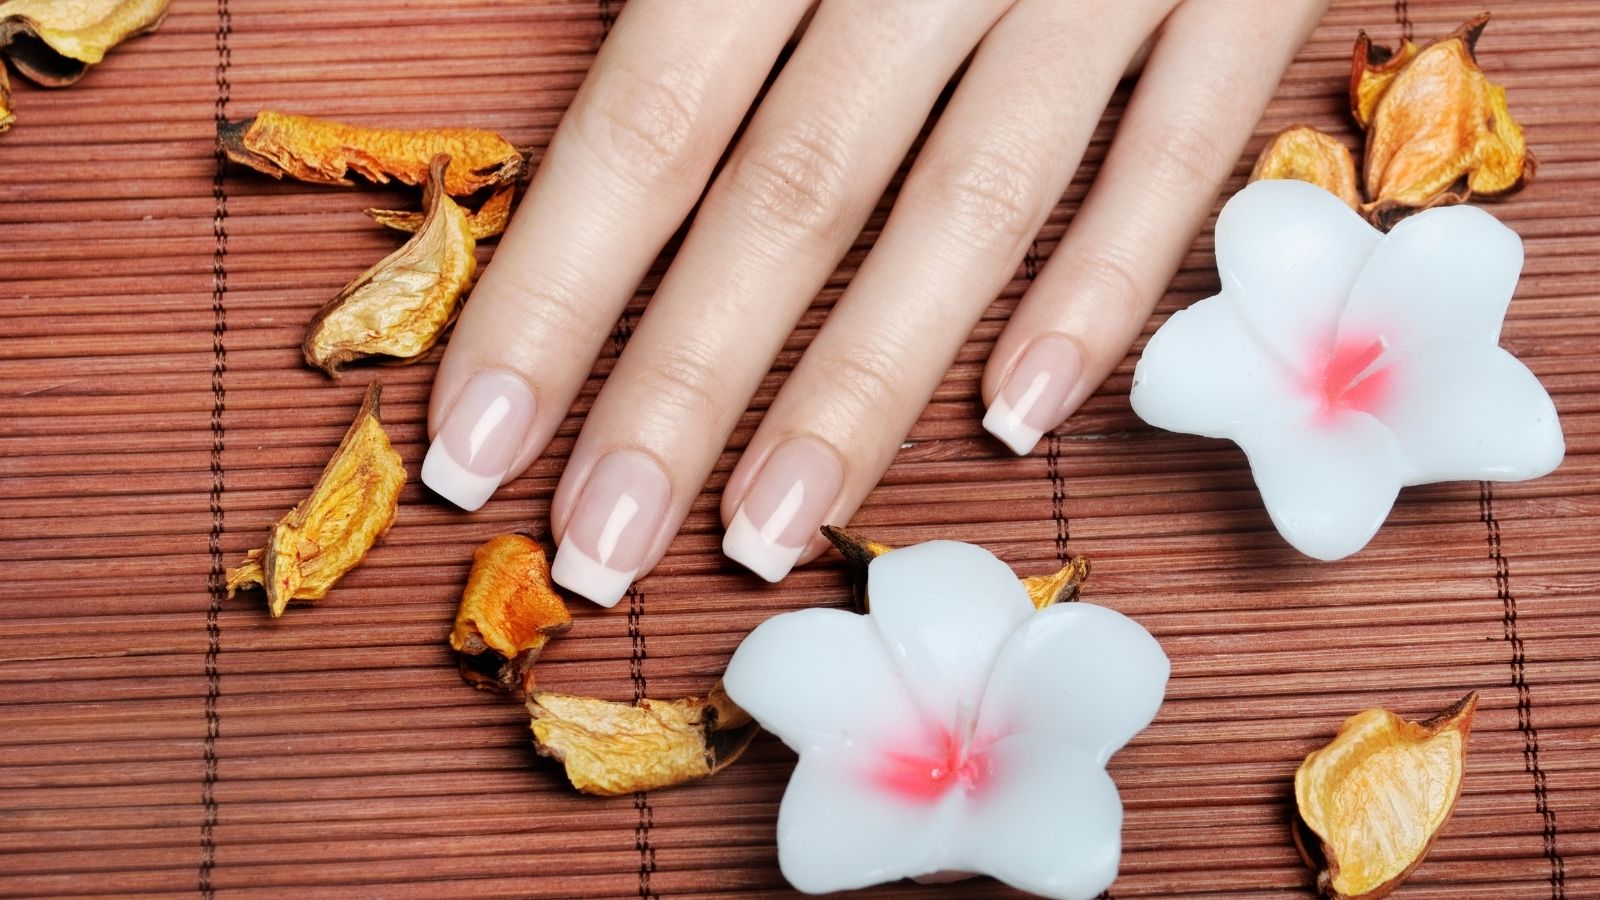 Try a Nice French Manicure